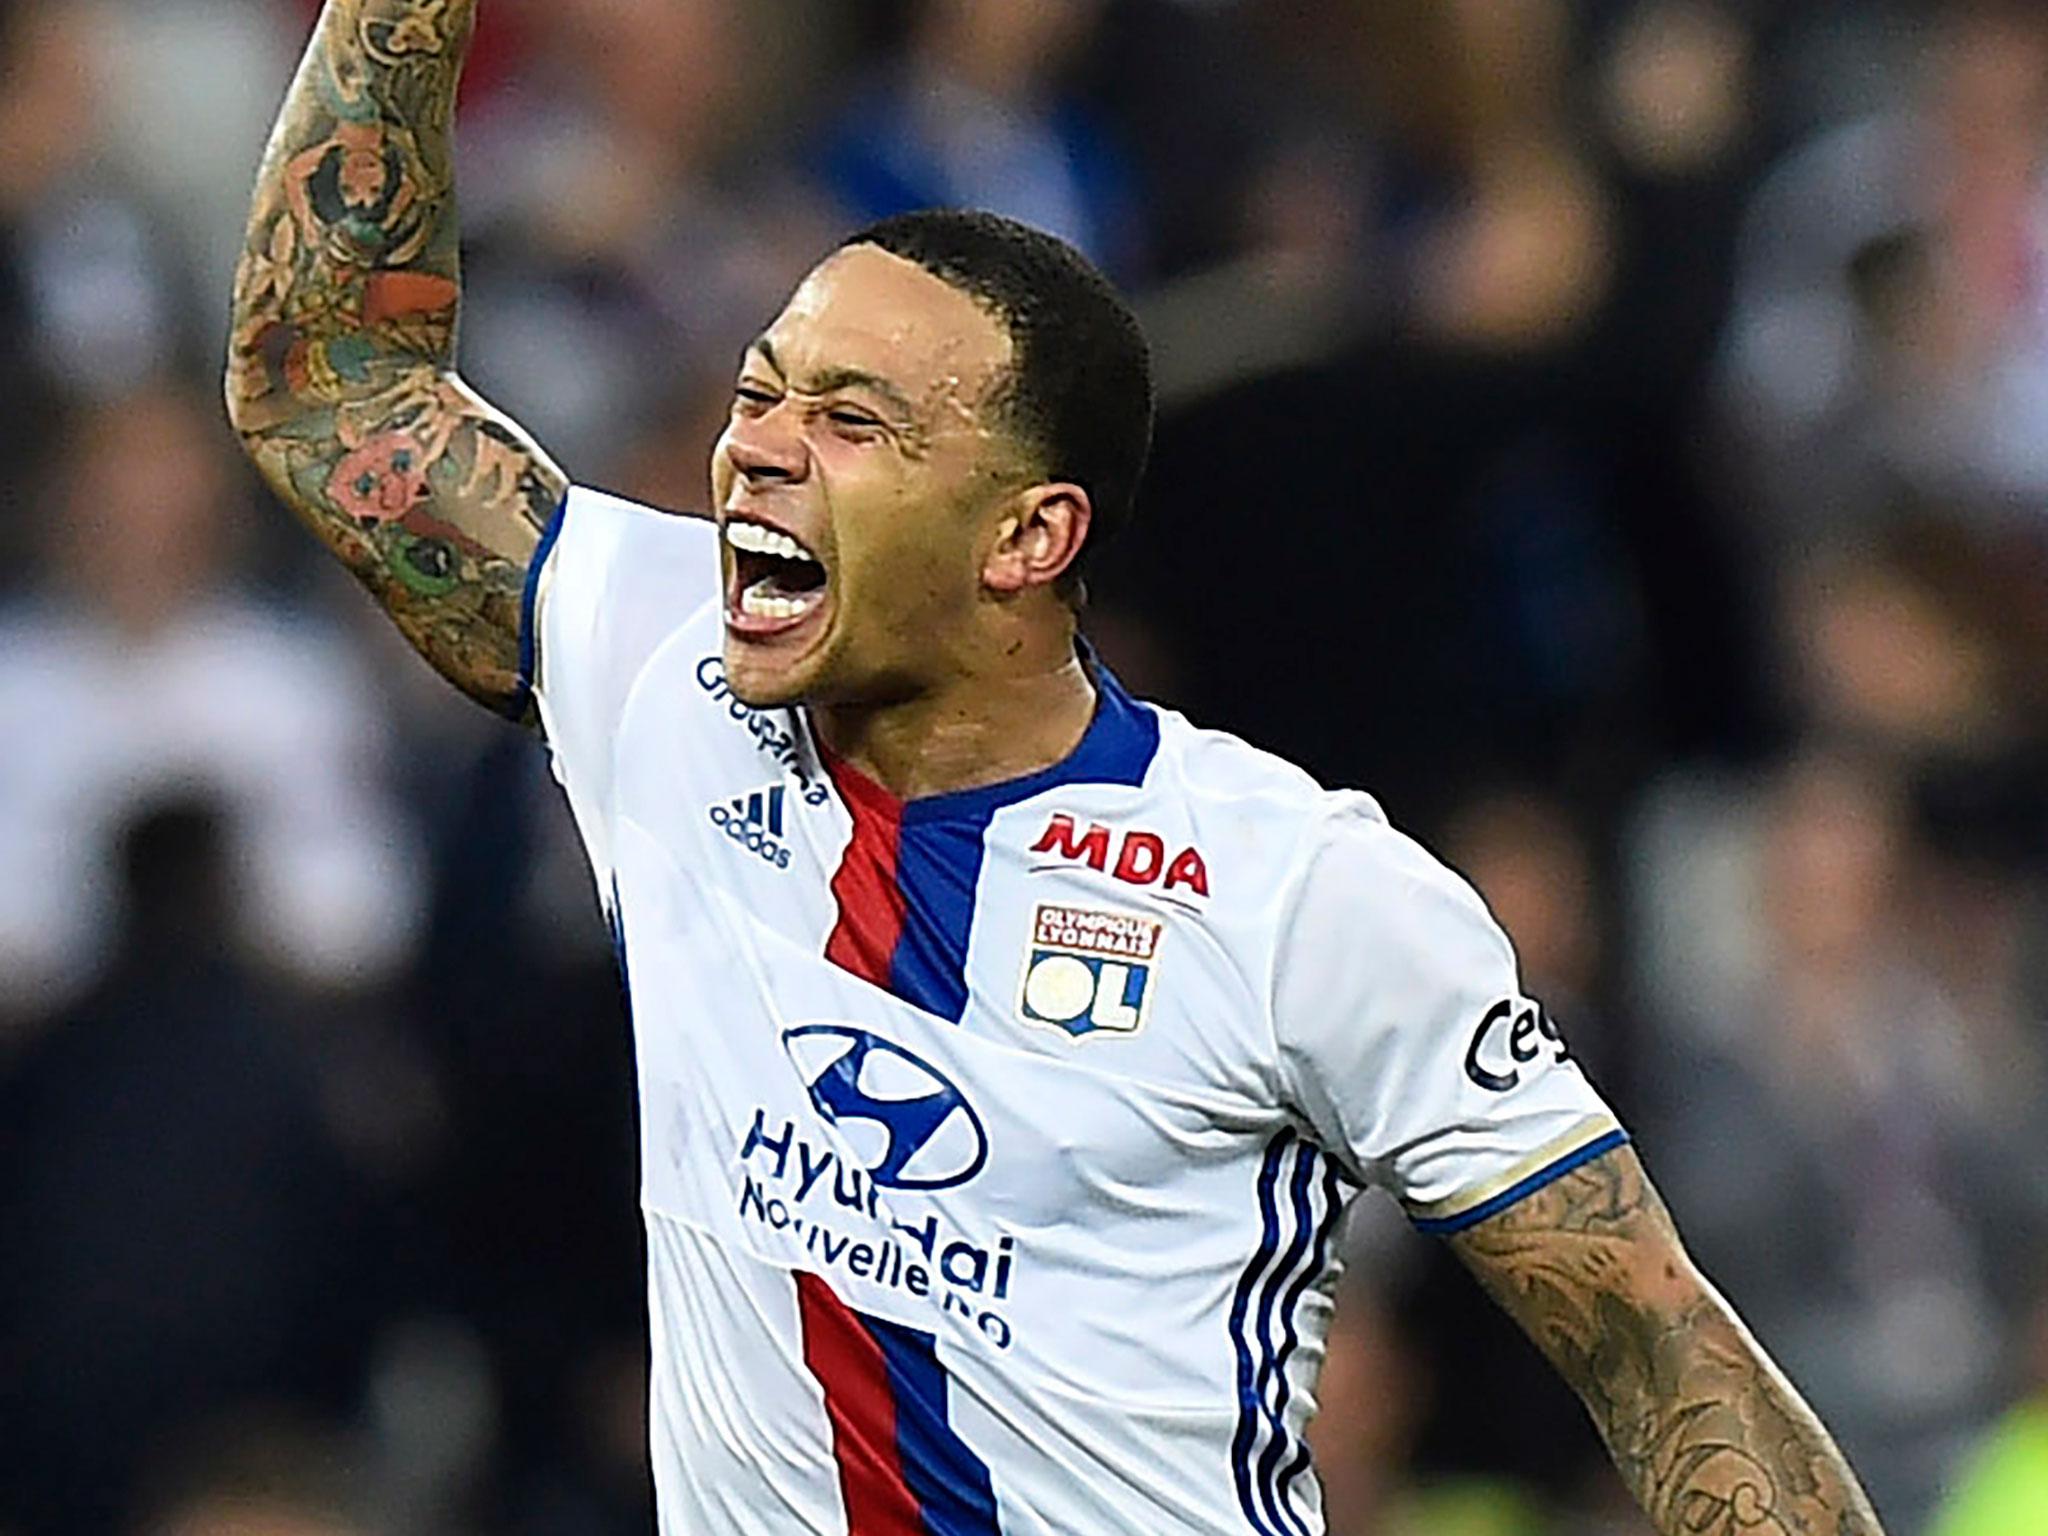 Memphis Depay scored a wondergoal against Toulouseat the weekend